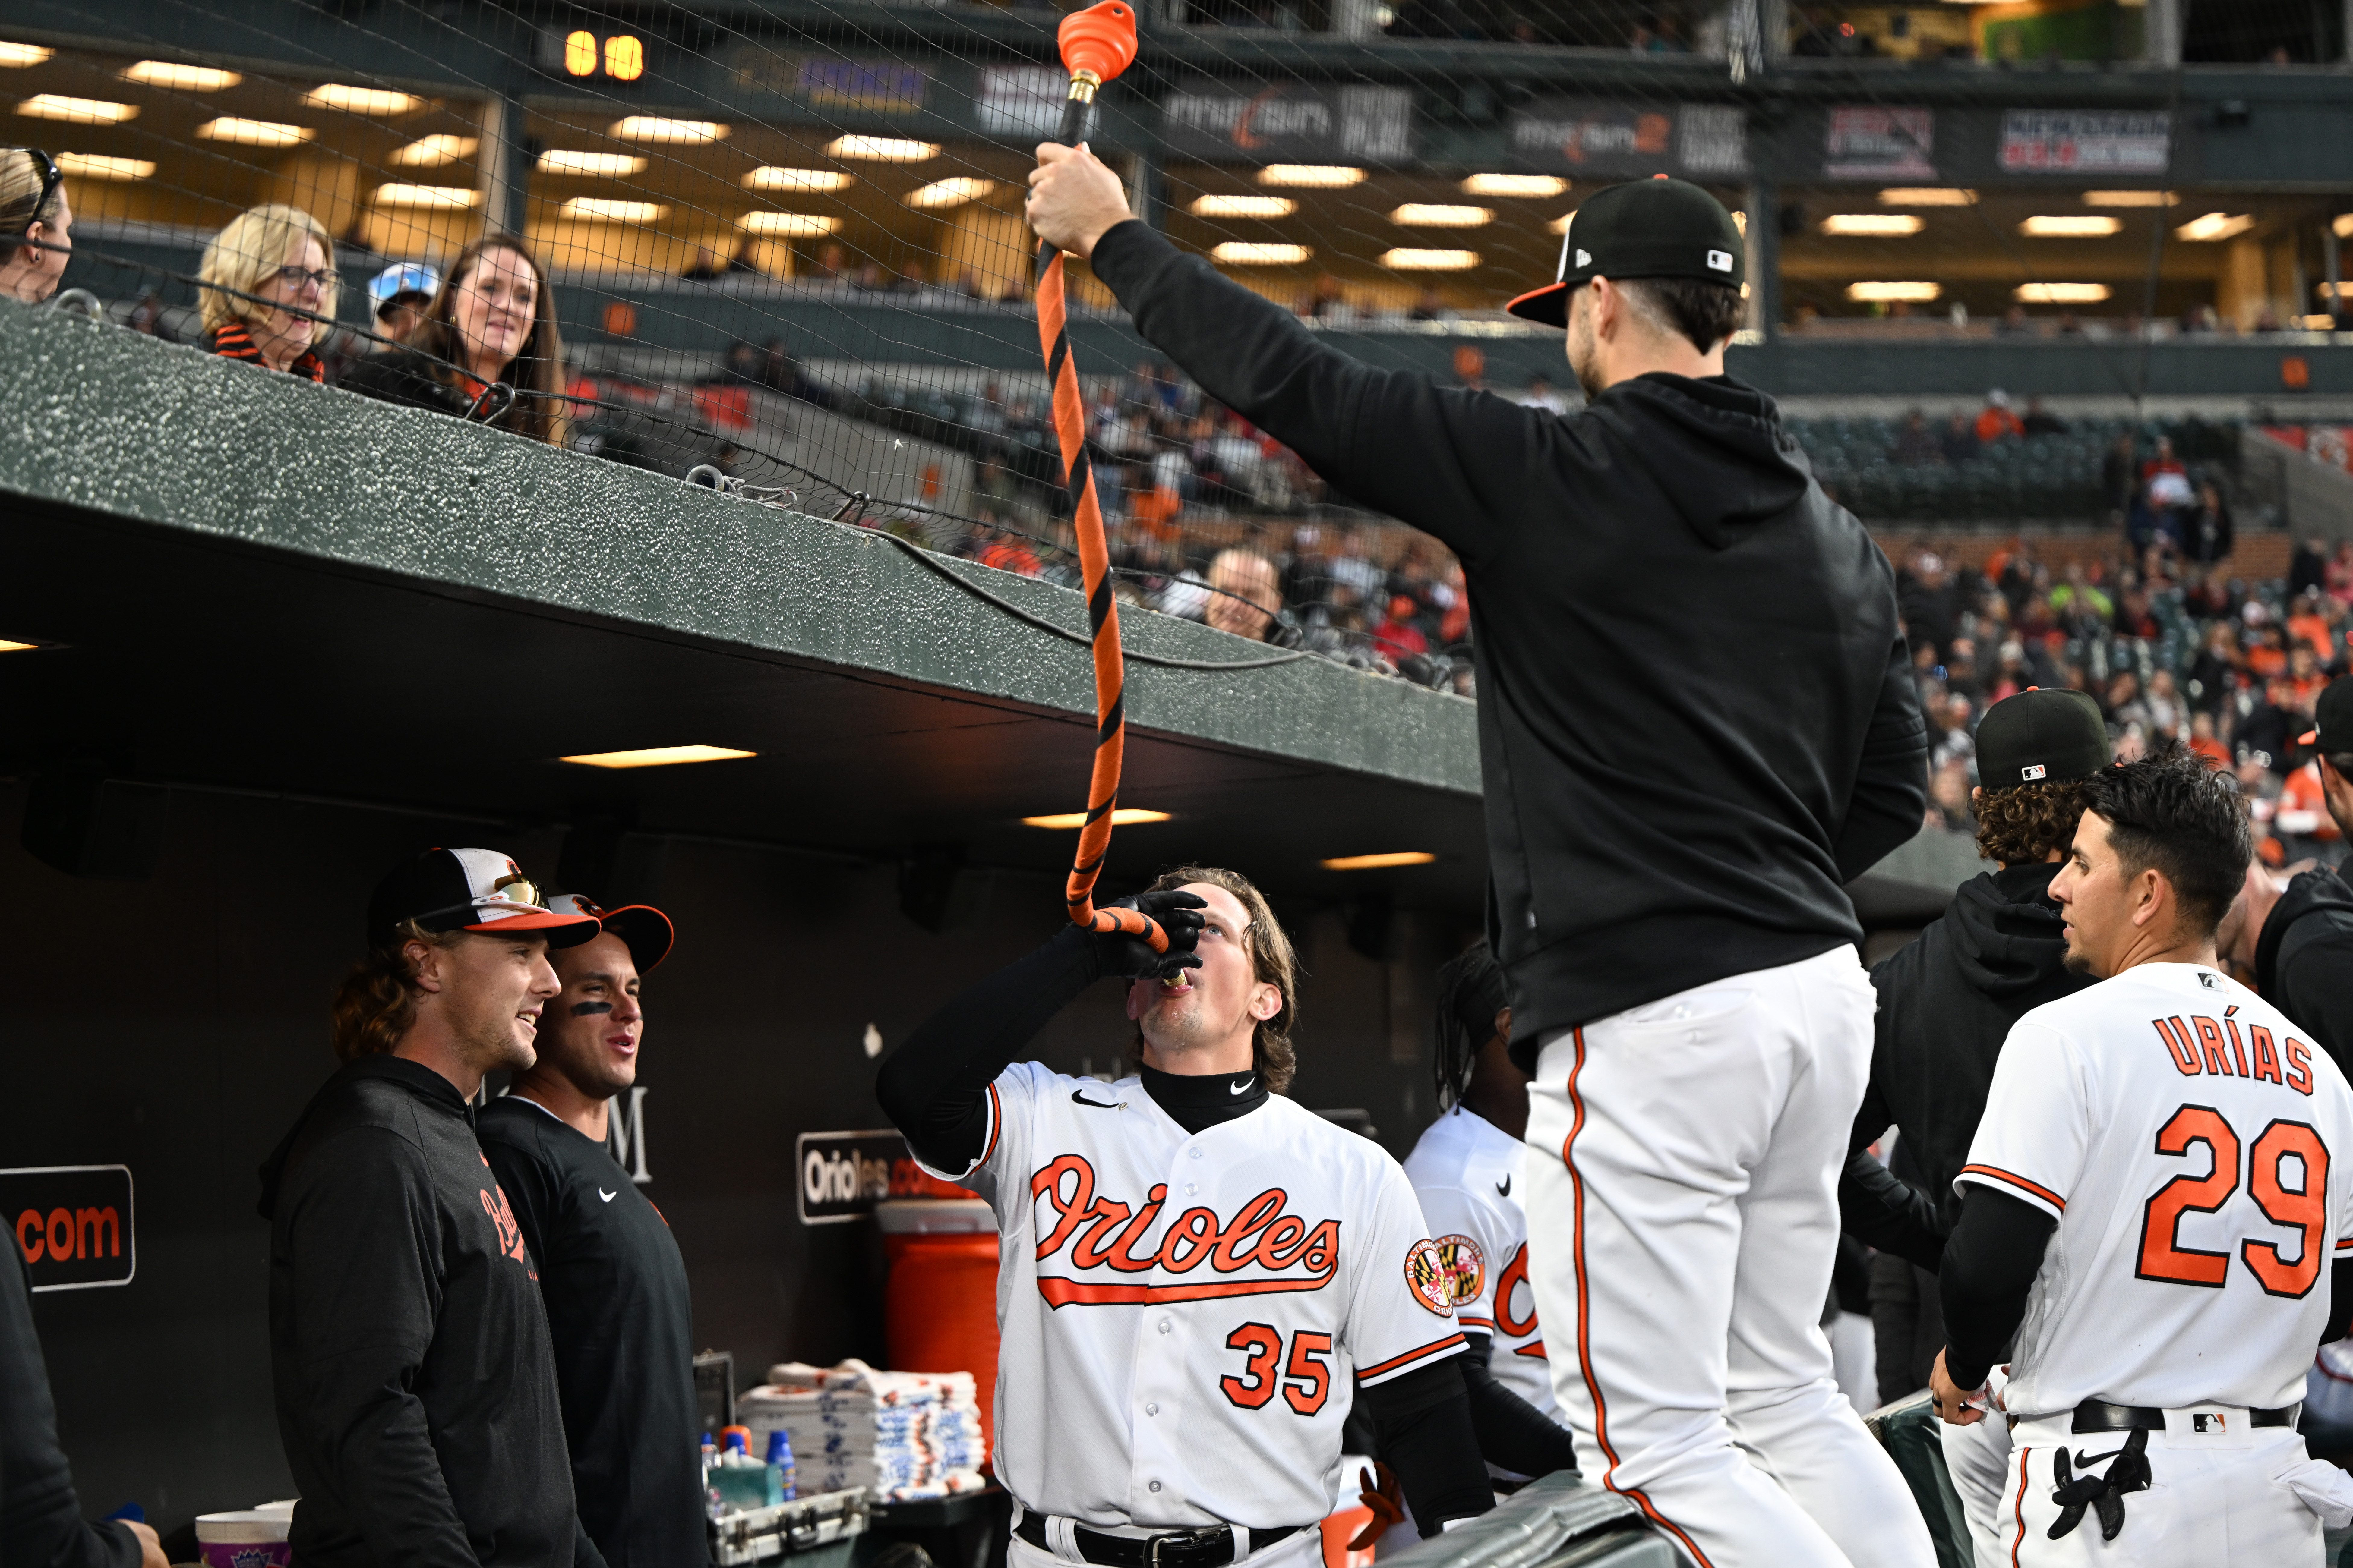 Photos: Orioles Celebrate Maryland With Special Uniforms